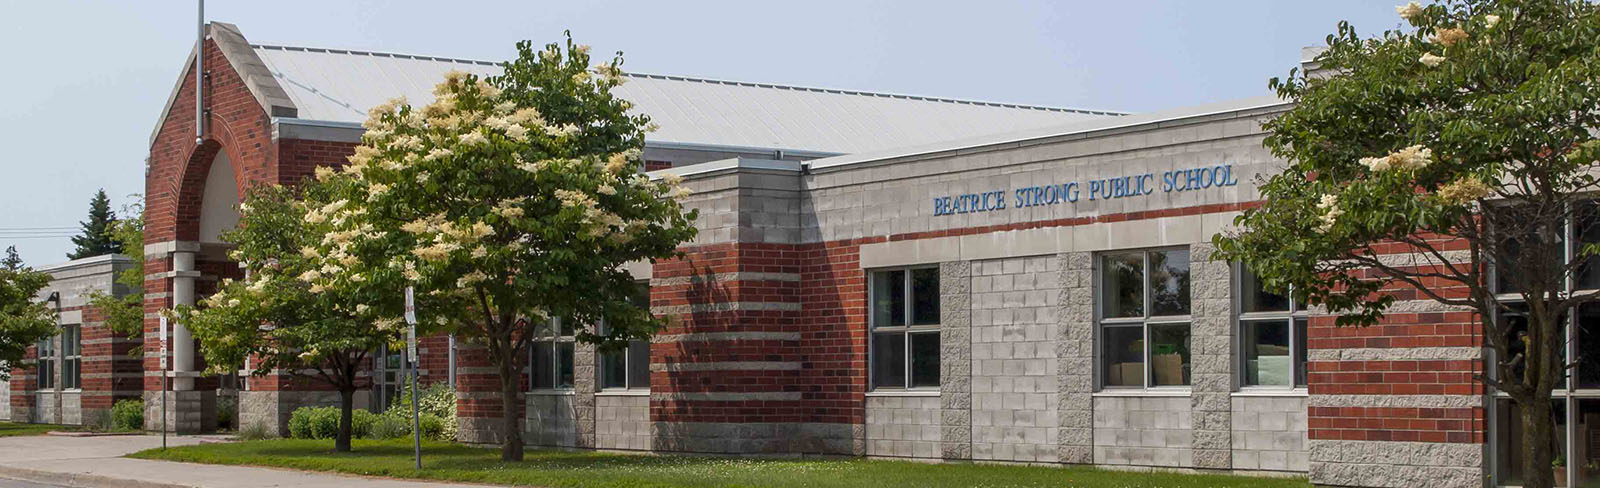 image of Beatrice Strong Public School